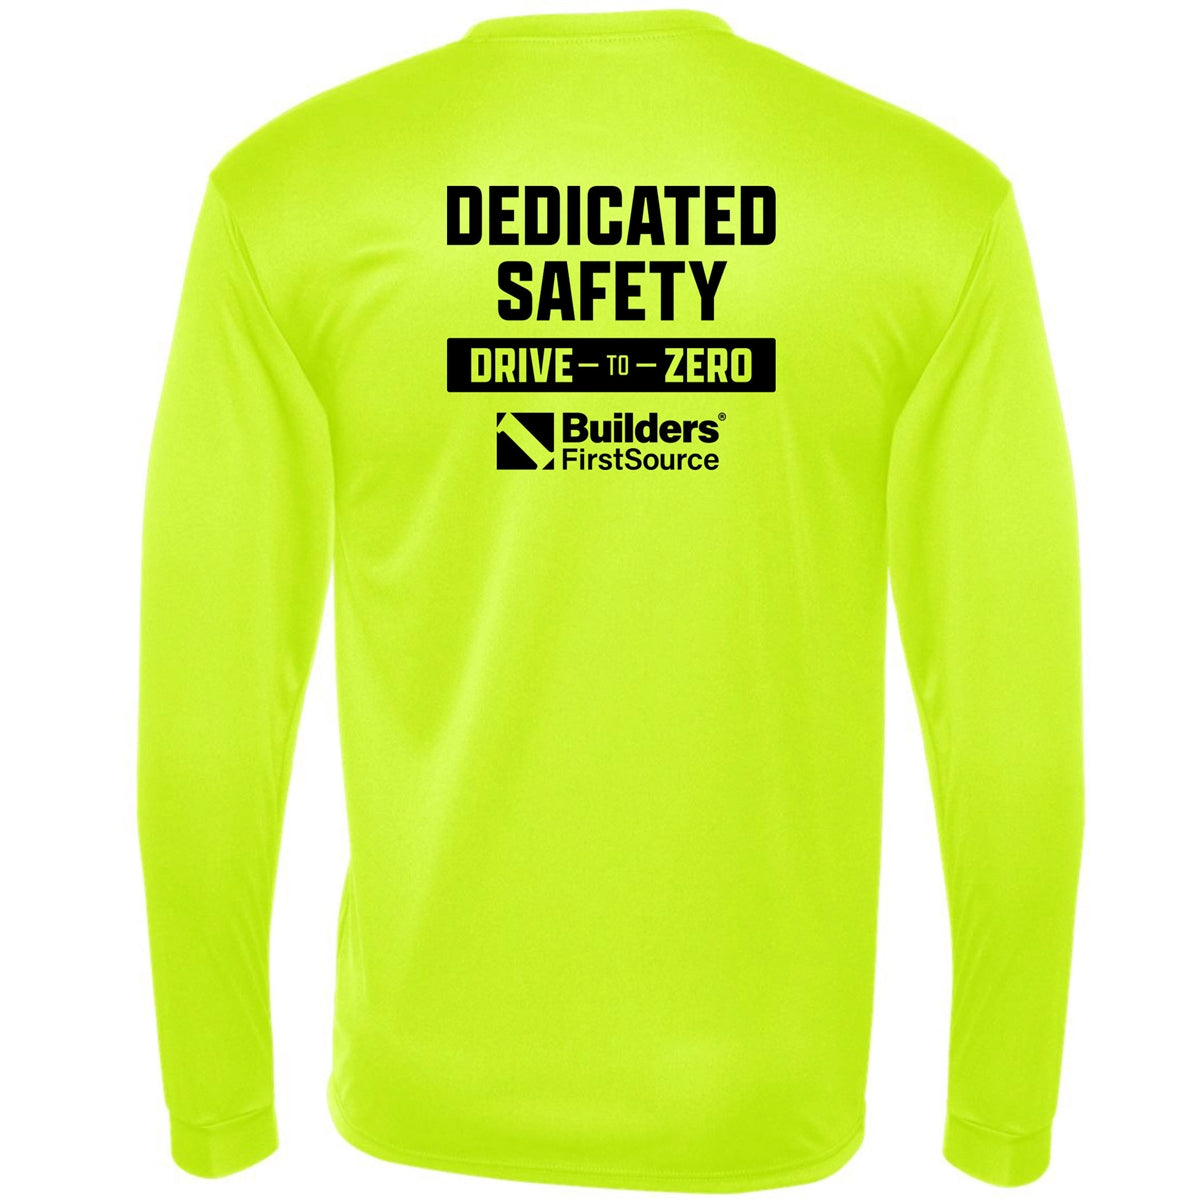 Dedicated Safety Drive-to-Zero Clique Spin Performance Long Sleeve Tee